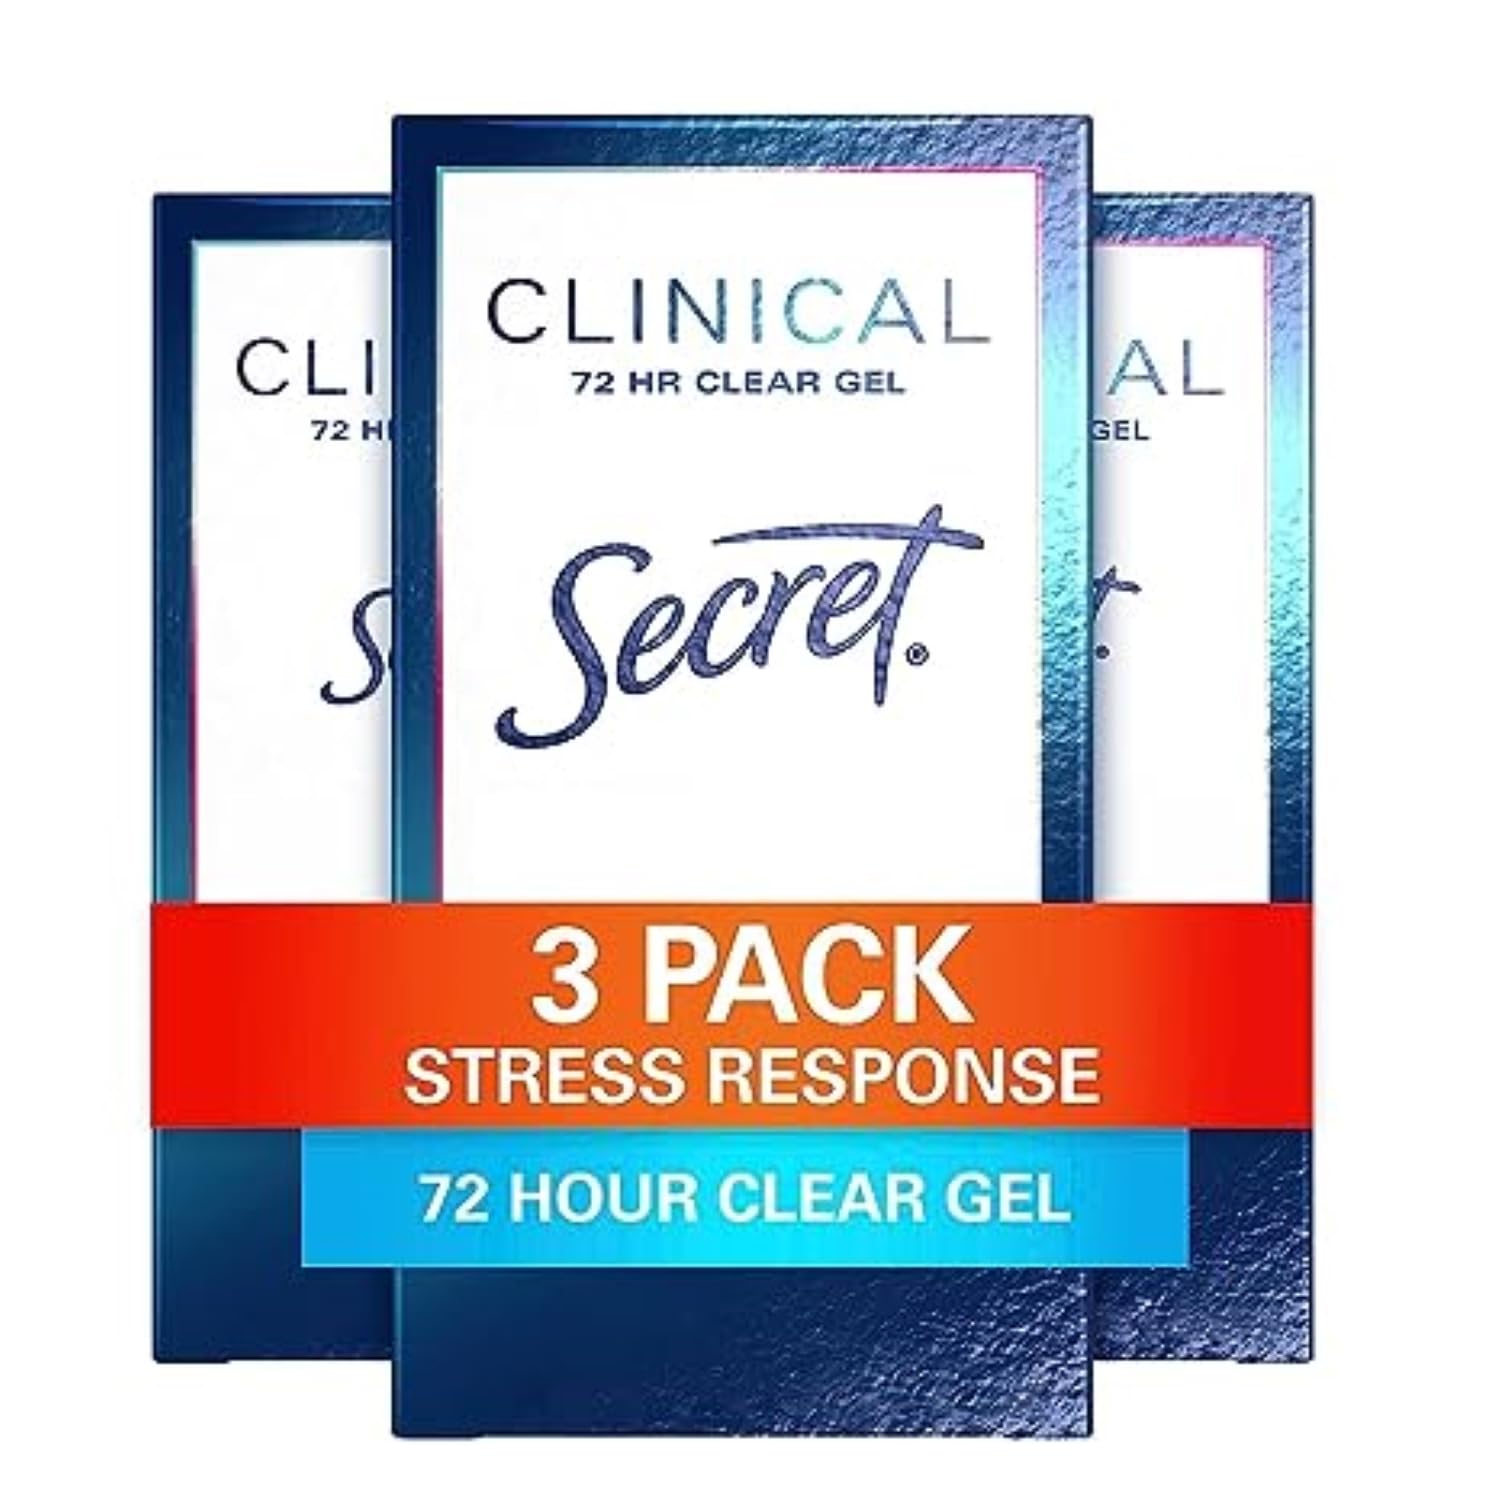 3-Count 1.6-Oz Secret Women's Clinical Strength Stress Response Antiperspirant Deodorant (Clear Gel) $9.49 ($3.16 each) w/ S&S + Free Shipping w/ Prime or on $35+